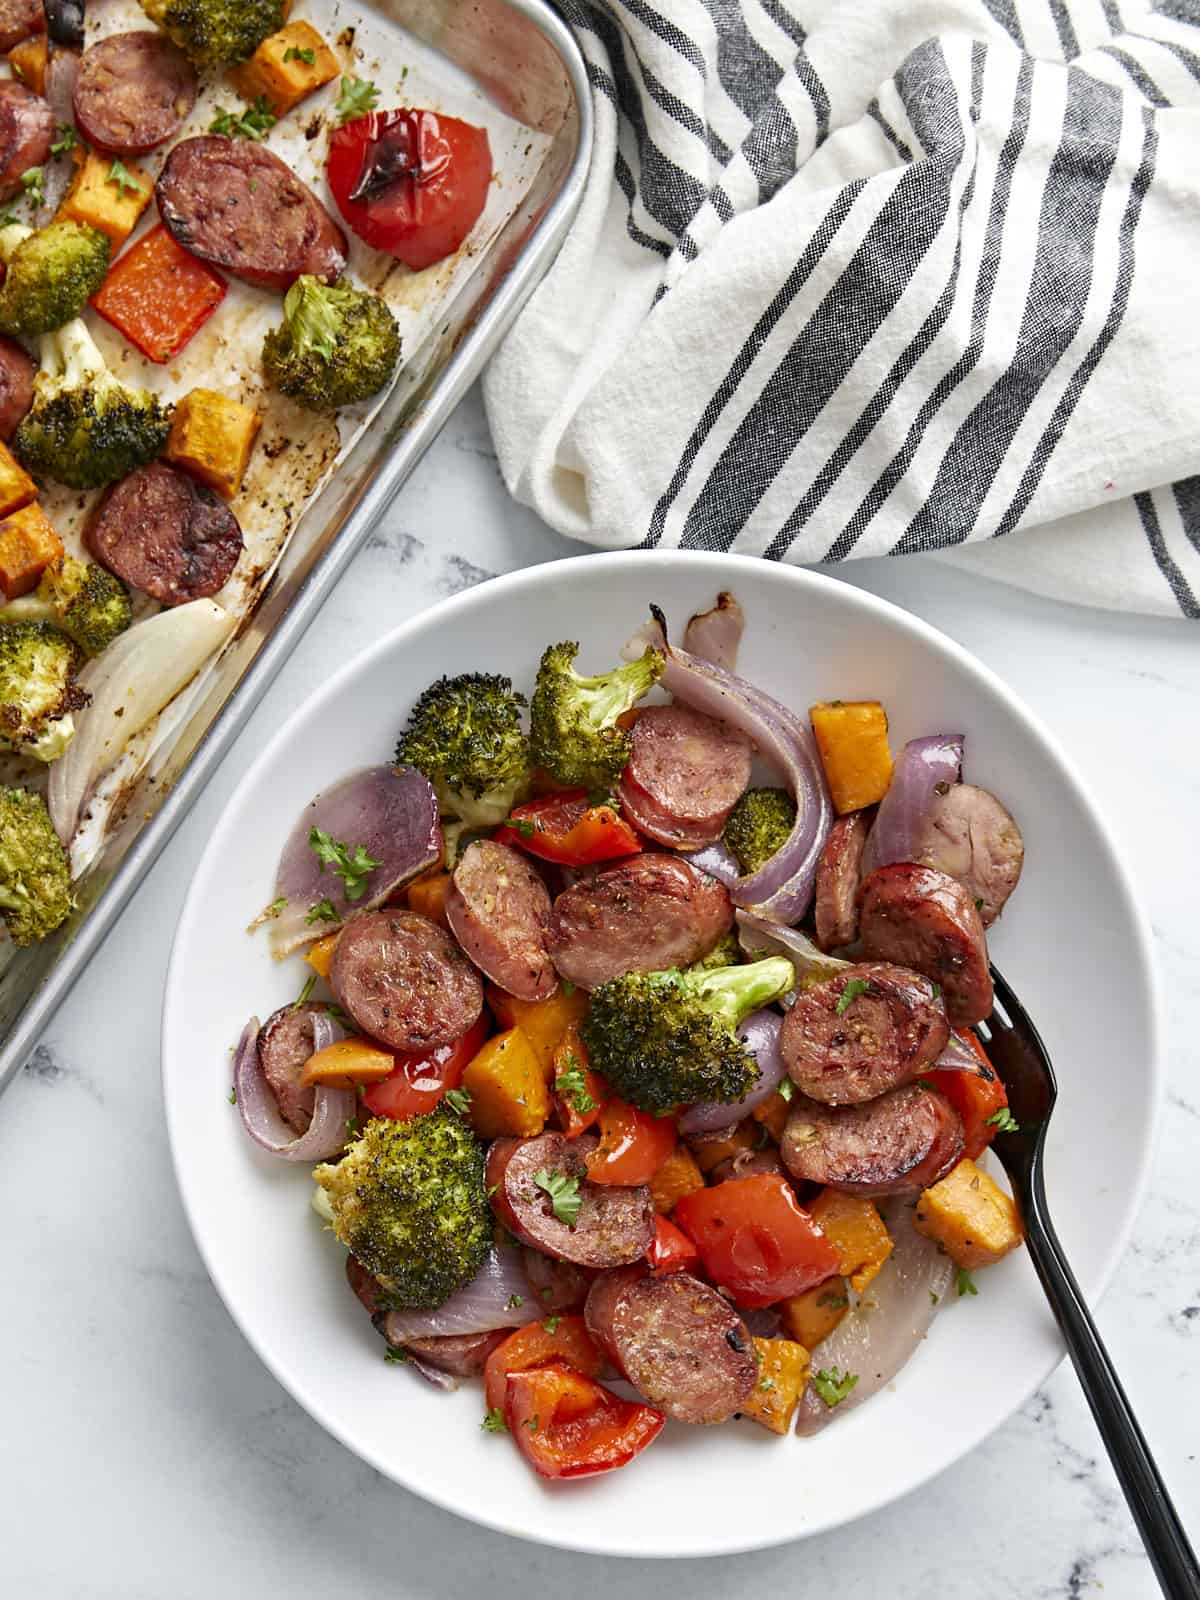 One serving of sheet pan chicken sausage and vegetables on a white plate with a black fork on the side.